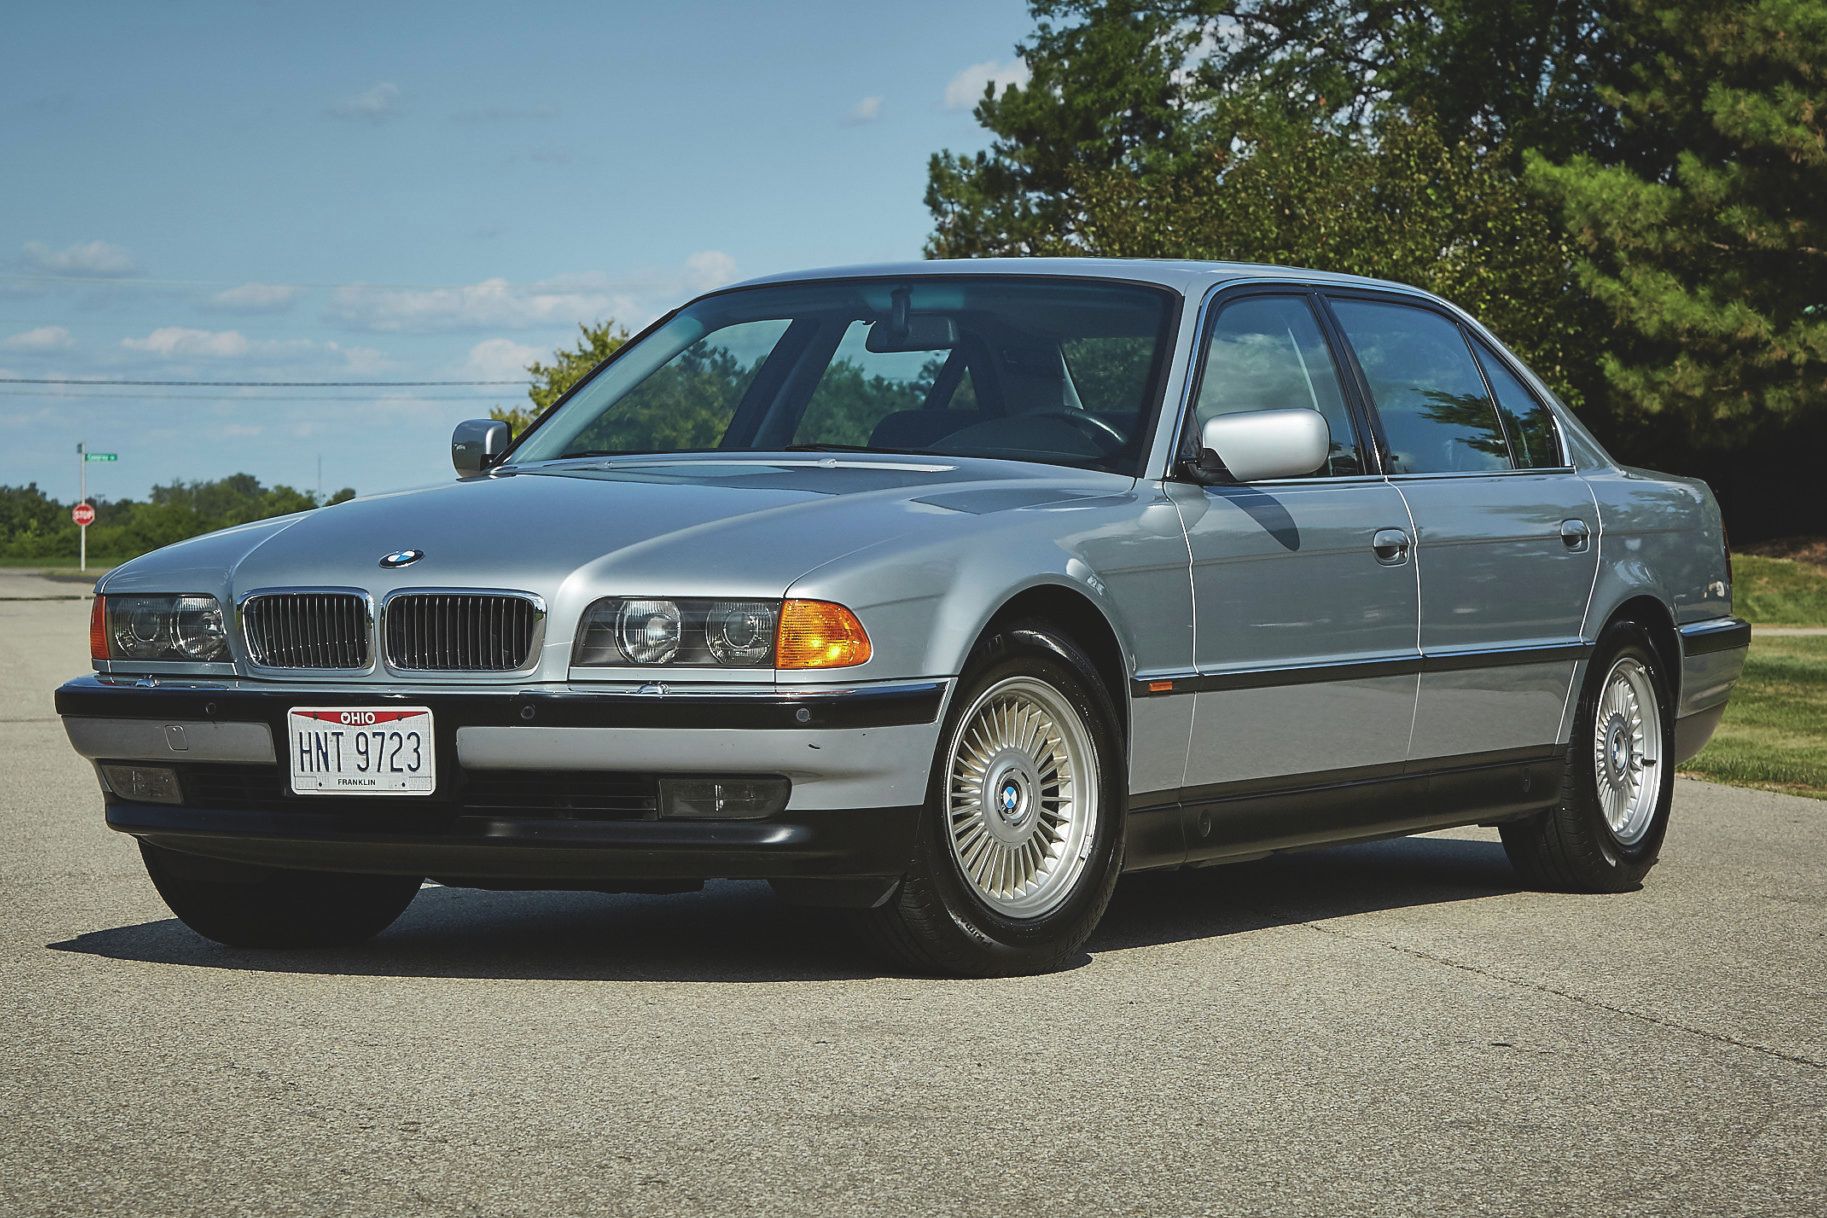 The 1997 BMW 750iL has an aggressive stance